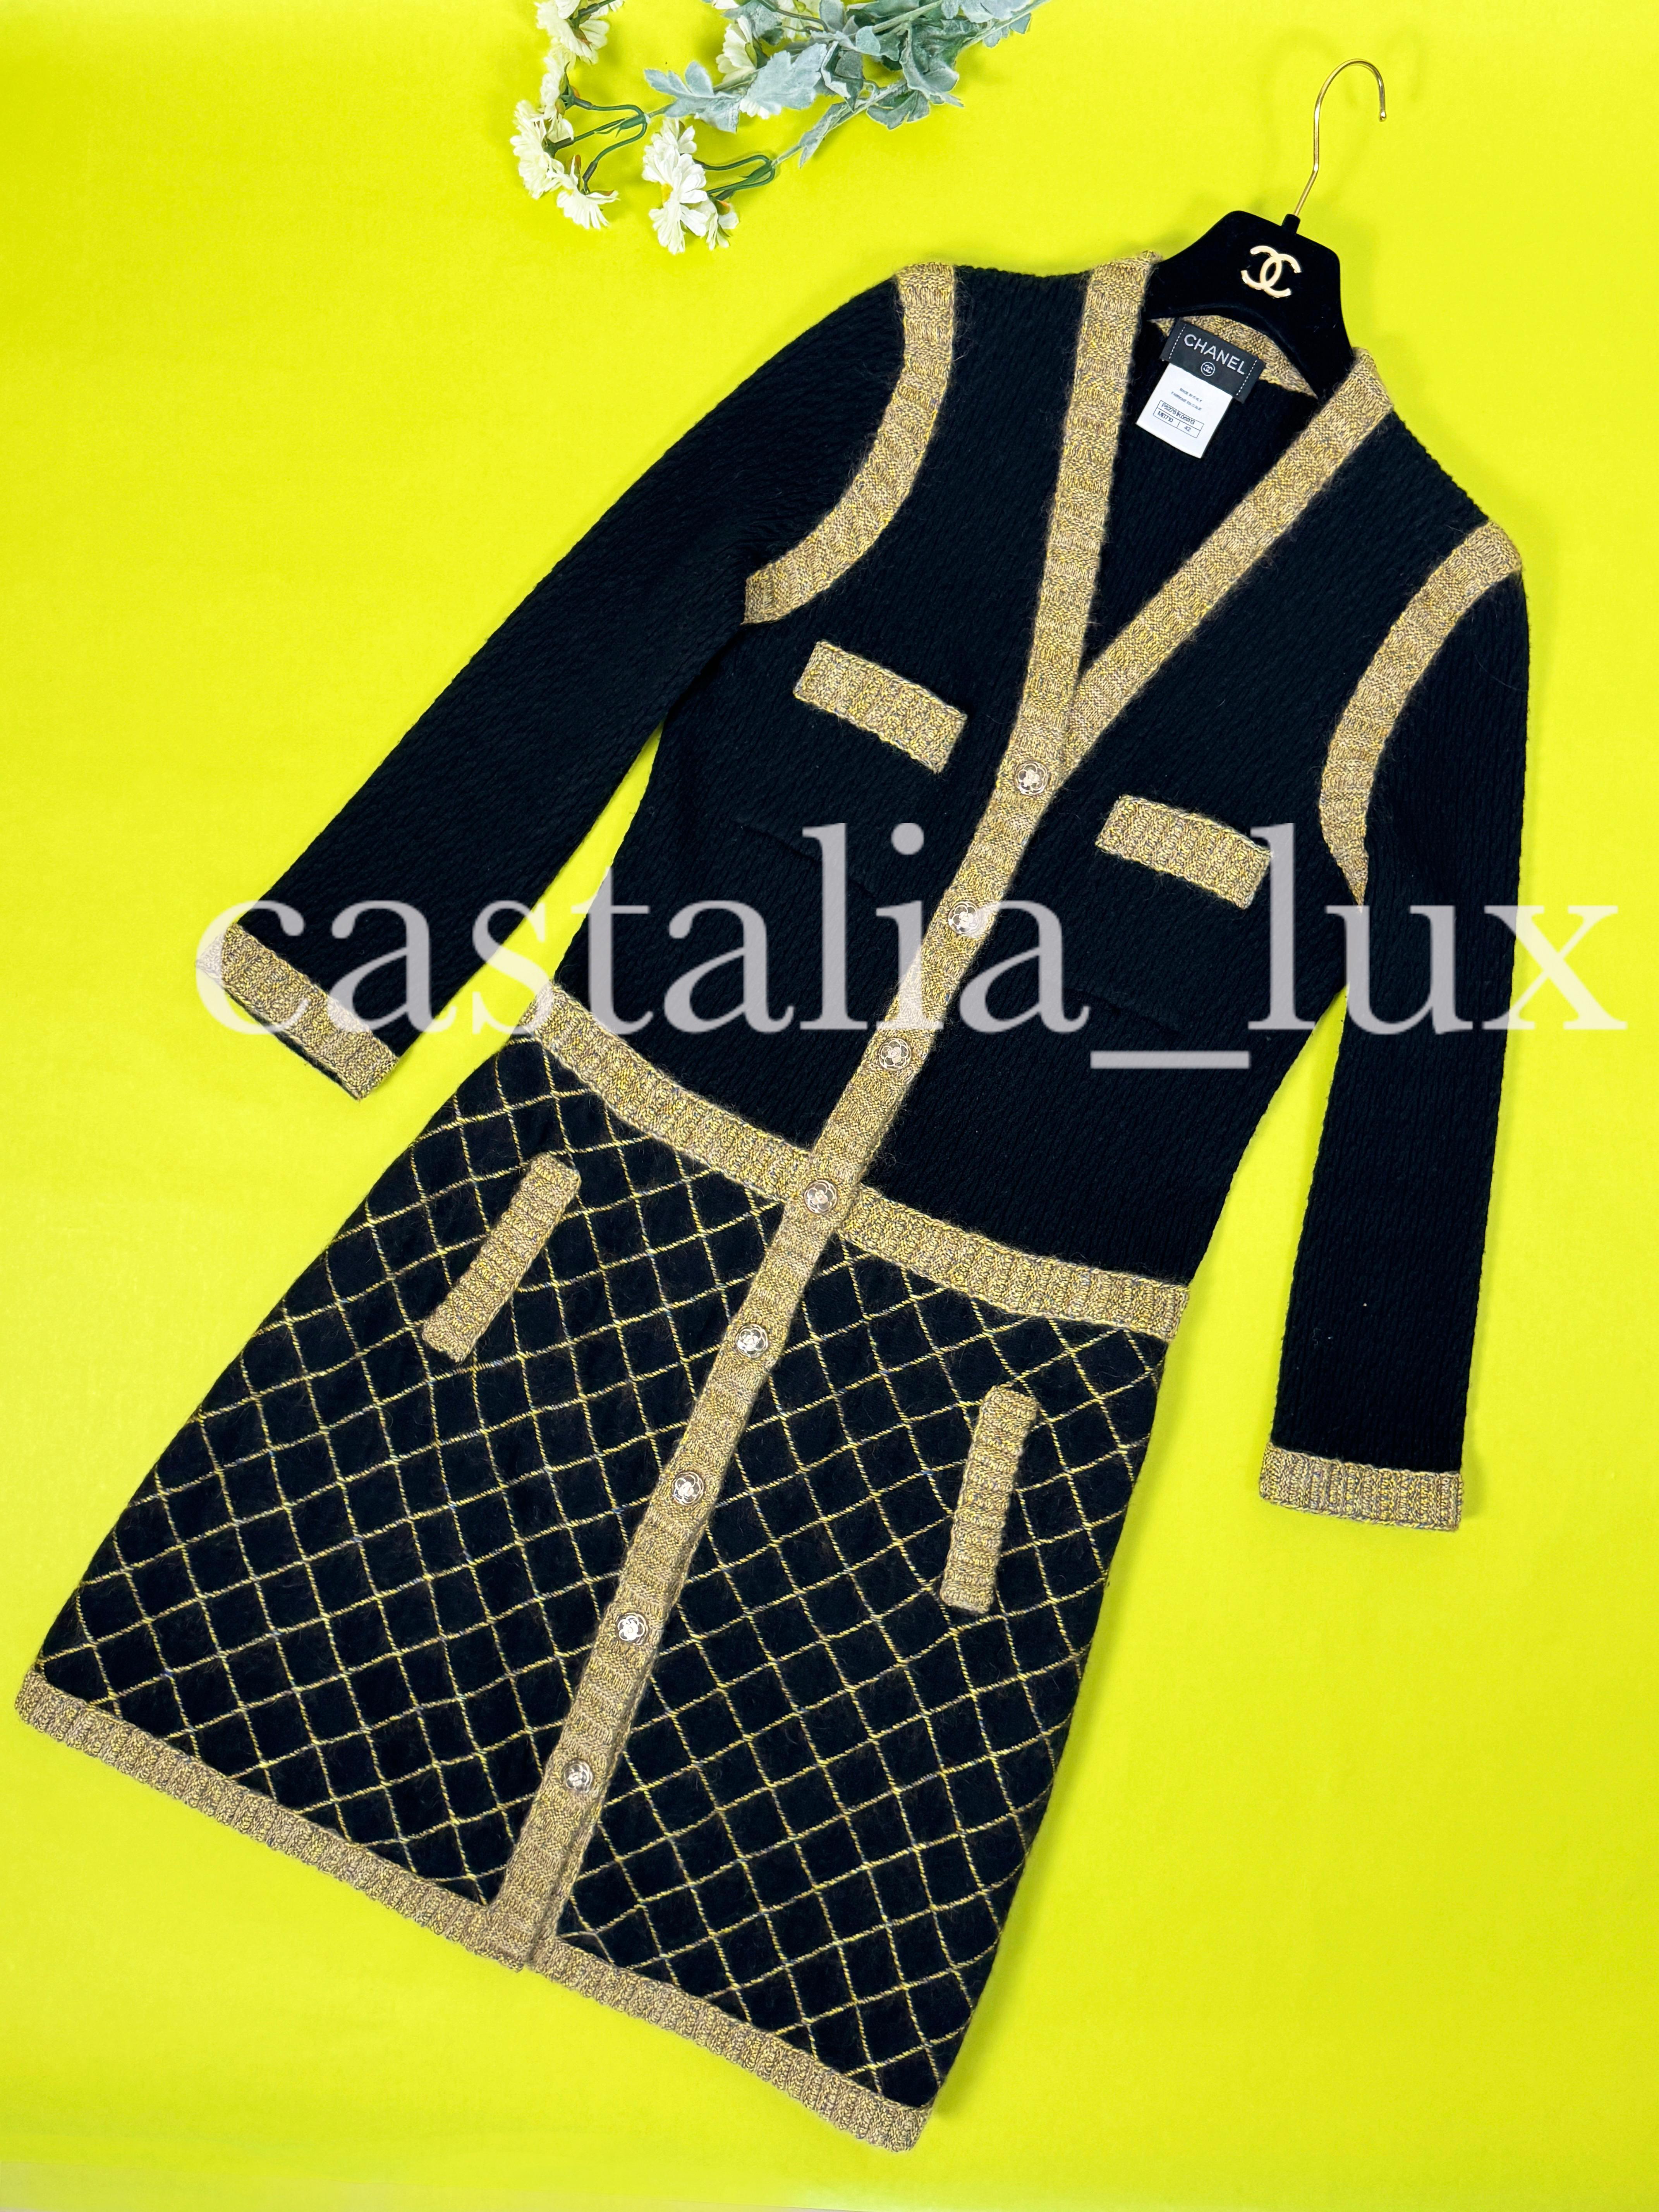 Chanel 8K$ New Iconic Coco Brasserie Quilted Jacket Dress For Sale 7